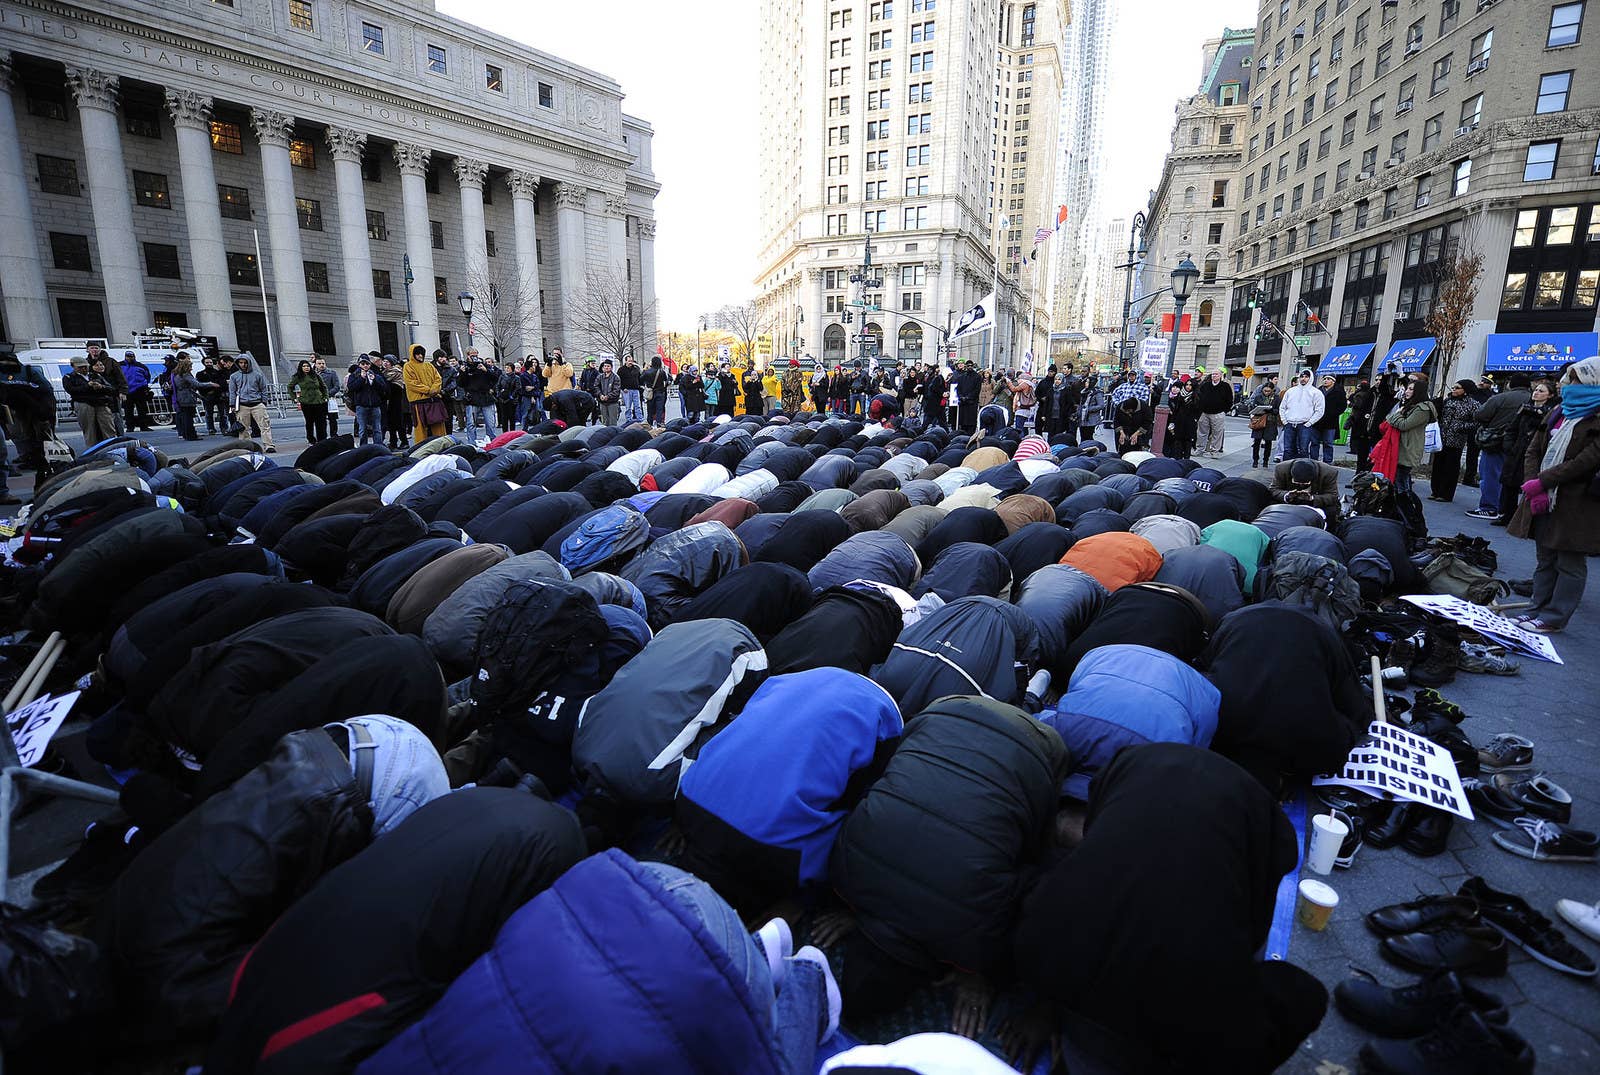 Muslims perform Friday prayers at Foley Square in New York City in support of Occupy Wall Street on Nov. 18, 2011.